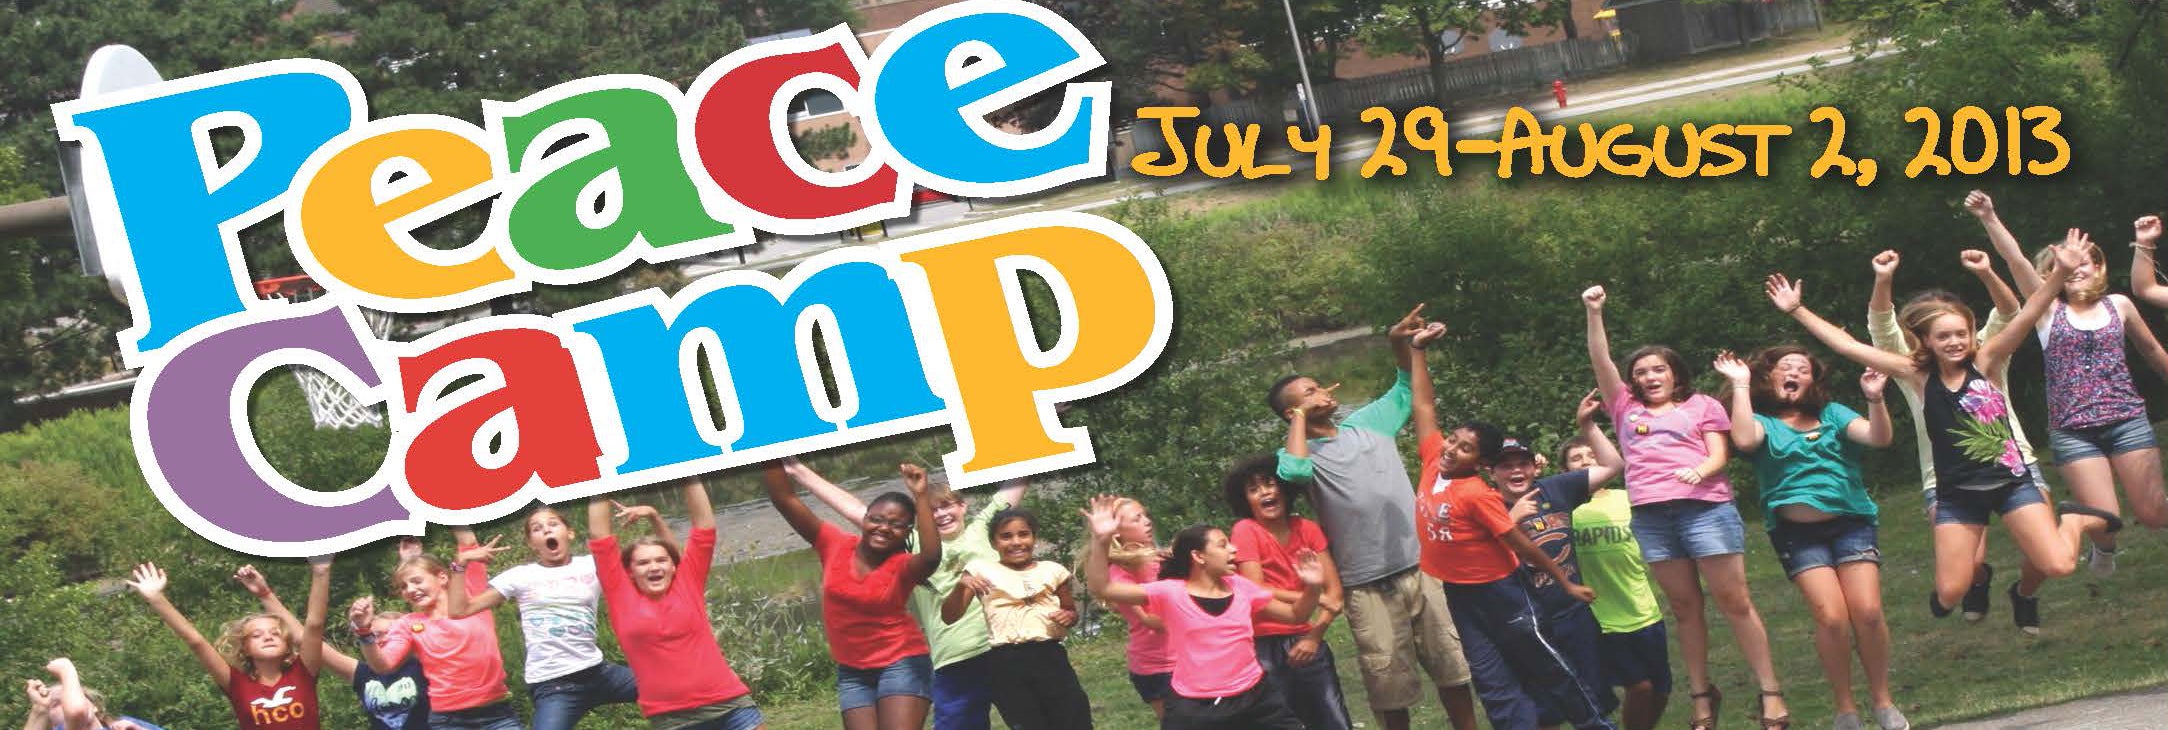 Peace Camp Logo. July 29 - August 2, 2013